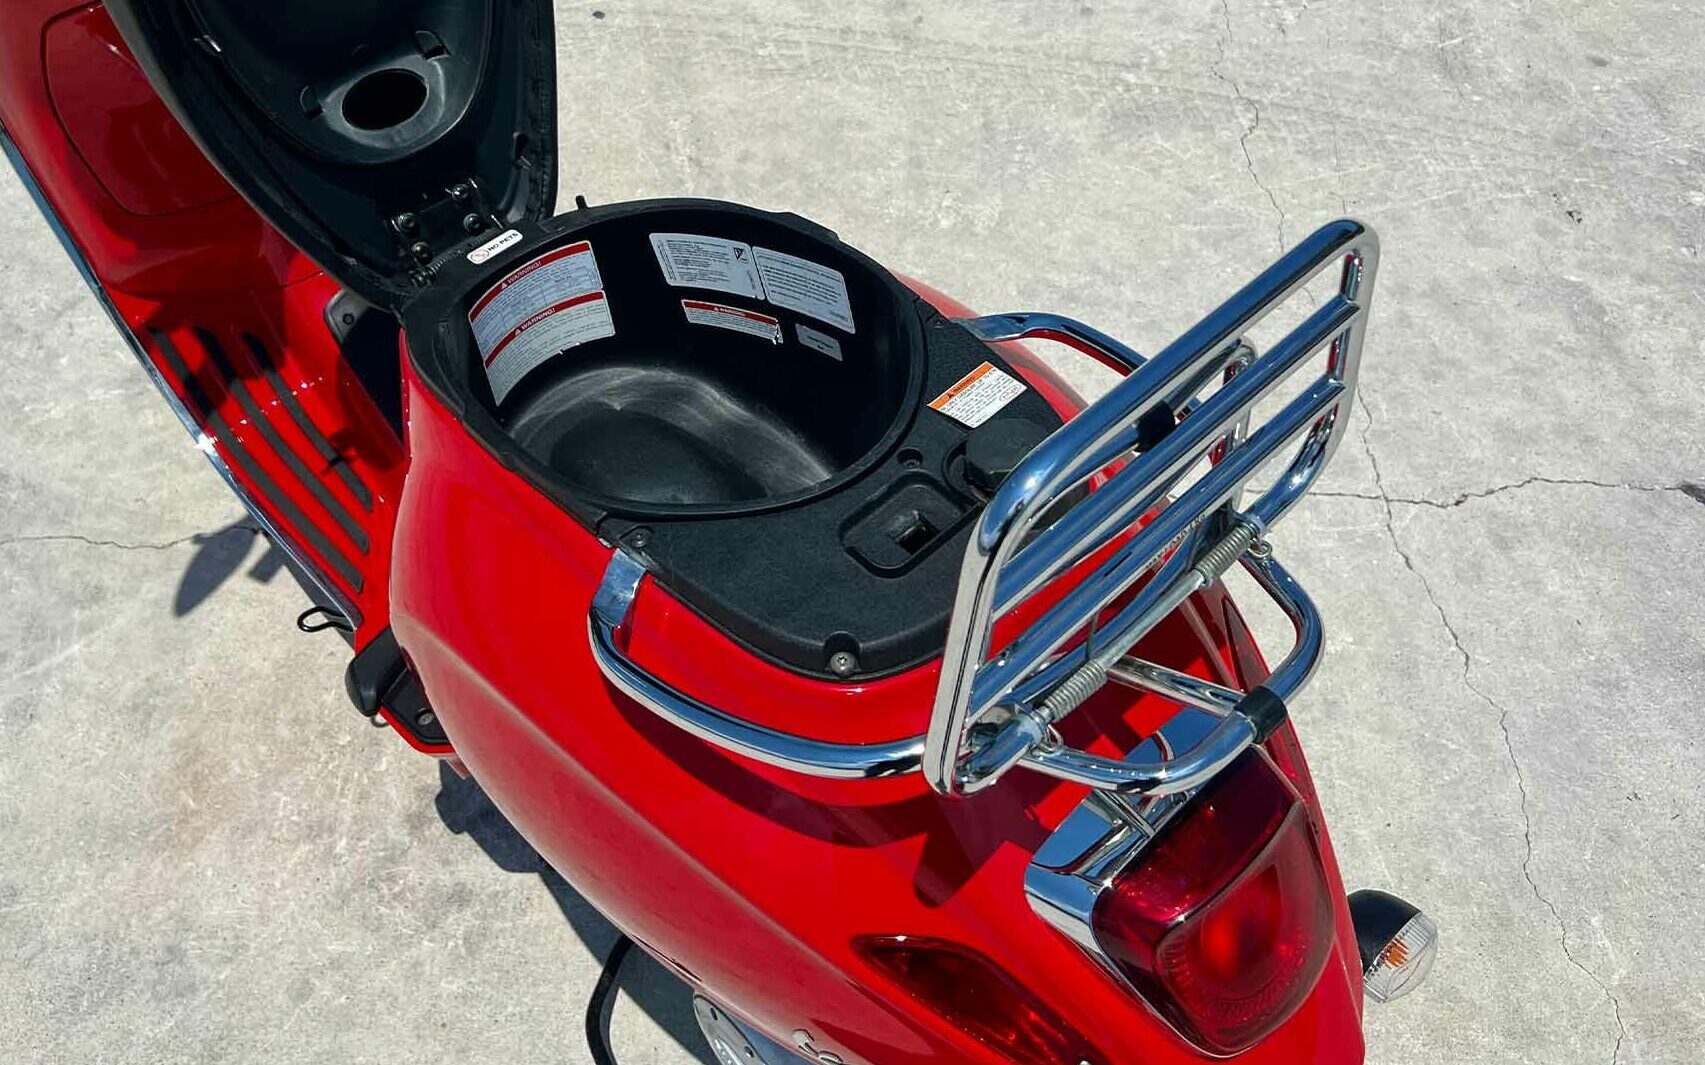 vespa-scooter-rental-sprint50-red-scooter-under-seat